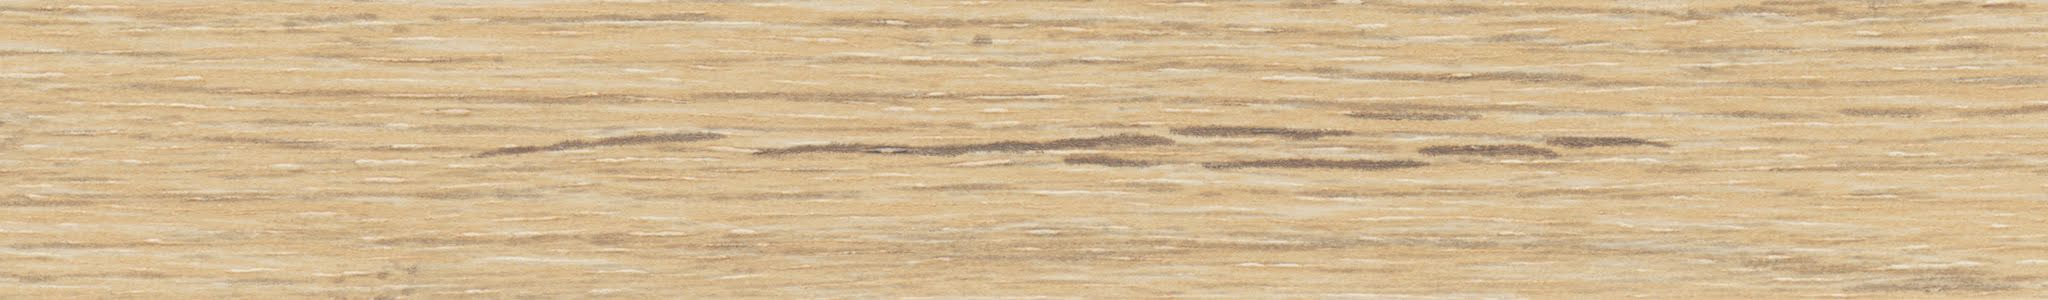 ABS K086 PW Natural Rockford Hickory 22x1mm HD 24086